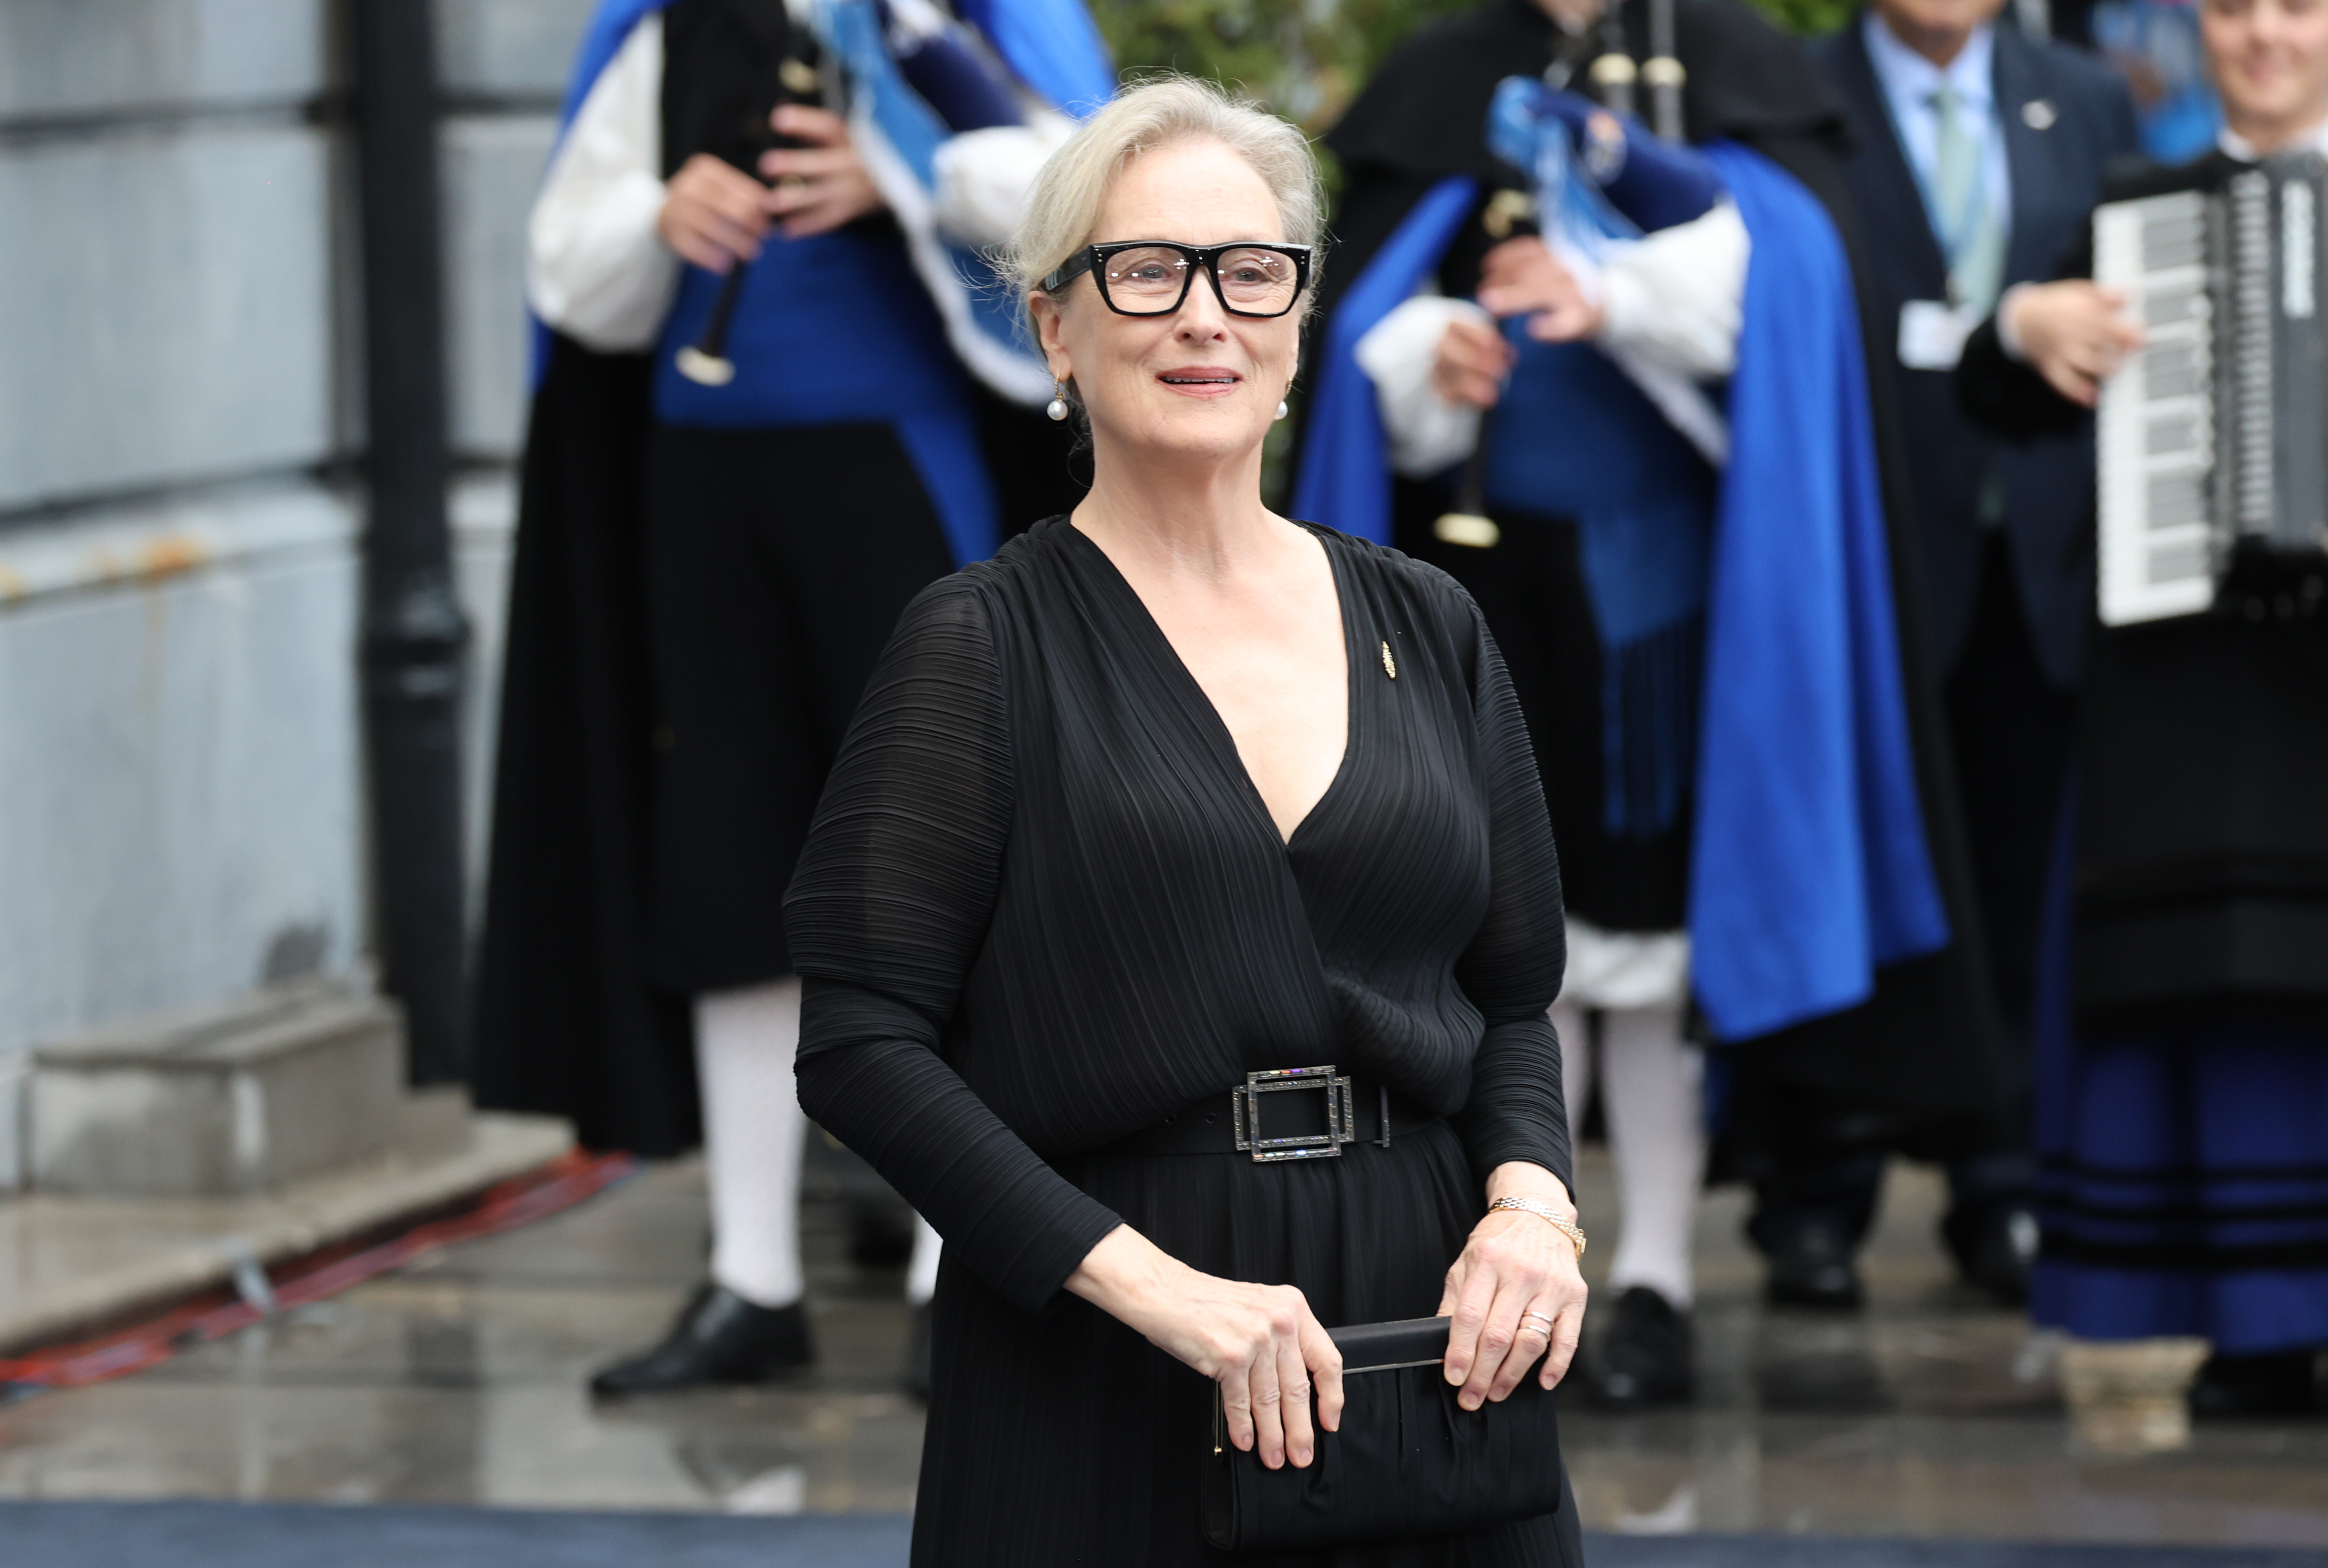 Meryl Streep on her arrival at the Princess of Asturias Awards ceremony, in Oviedo, Spain, on October 20, 2023. | Source: Getty Images